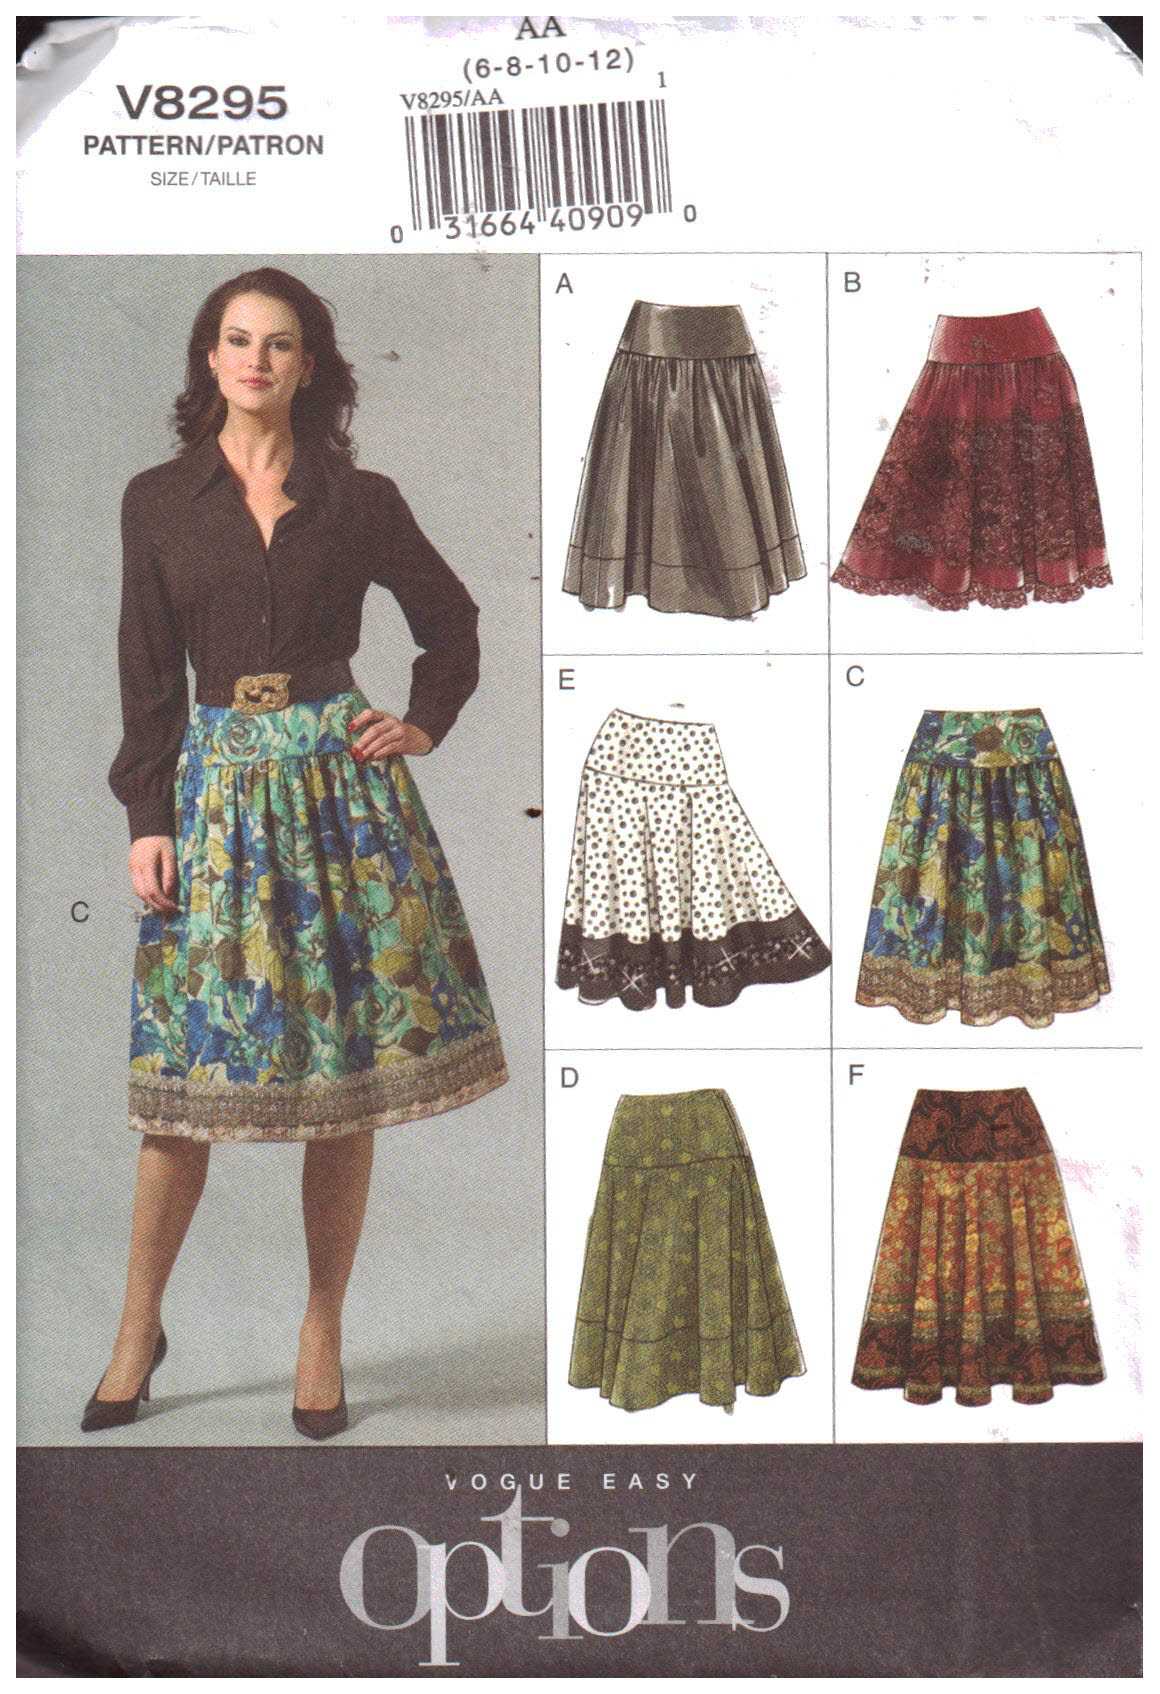 Vogue V8295 Skirt Size: AA 6-8-10-12 Used Sewing Pattern